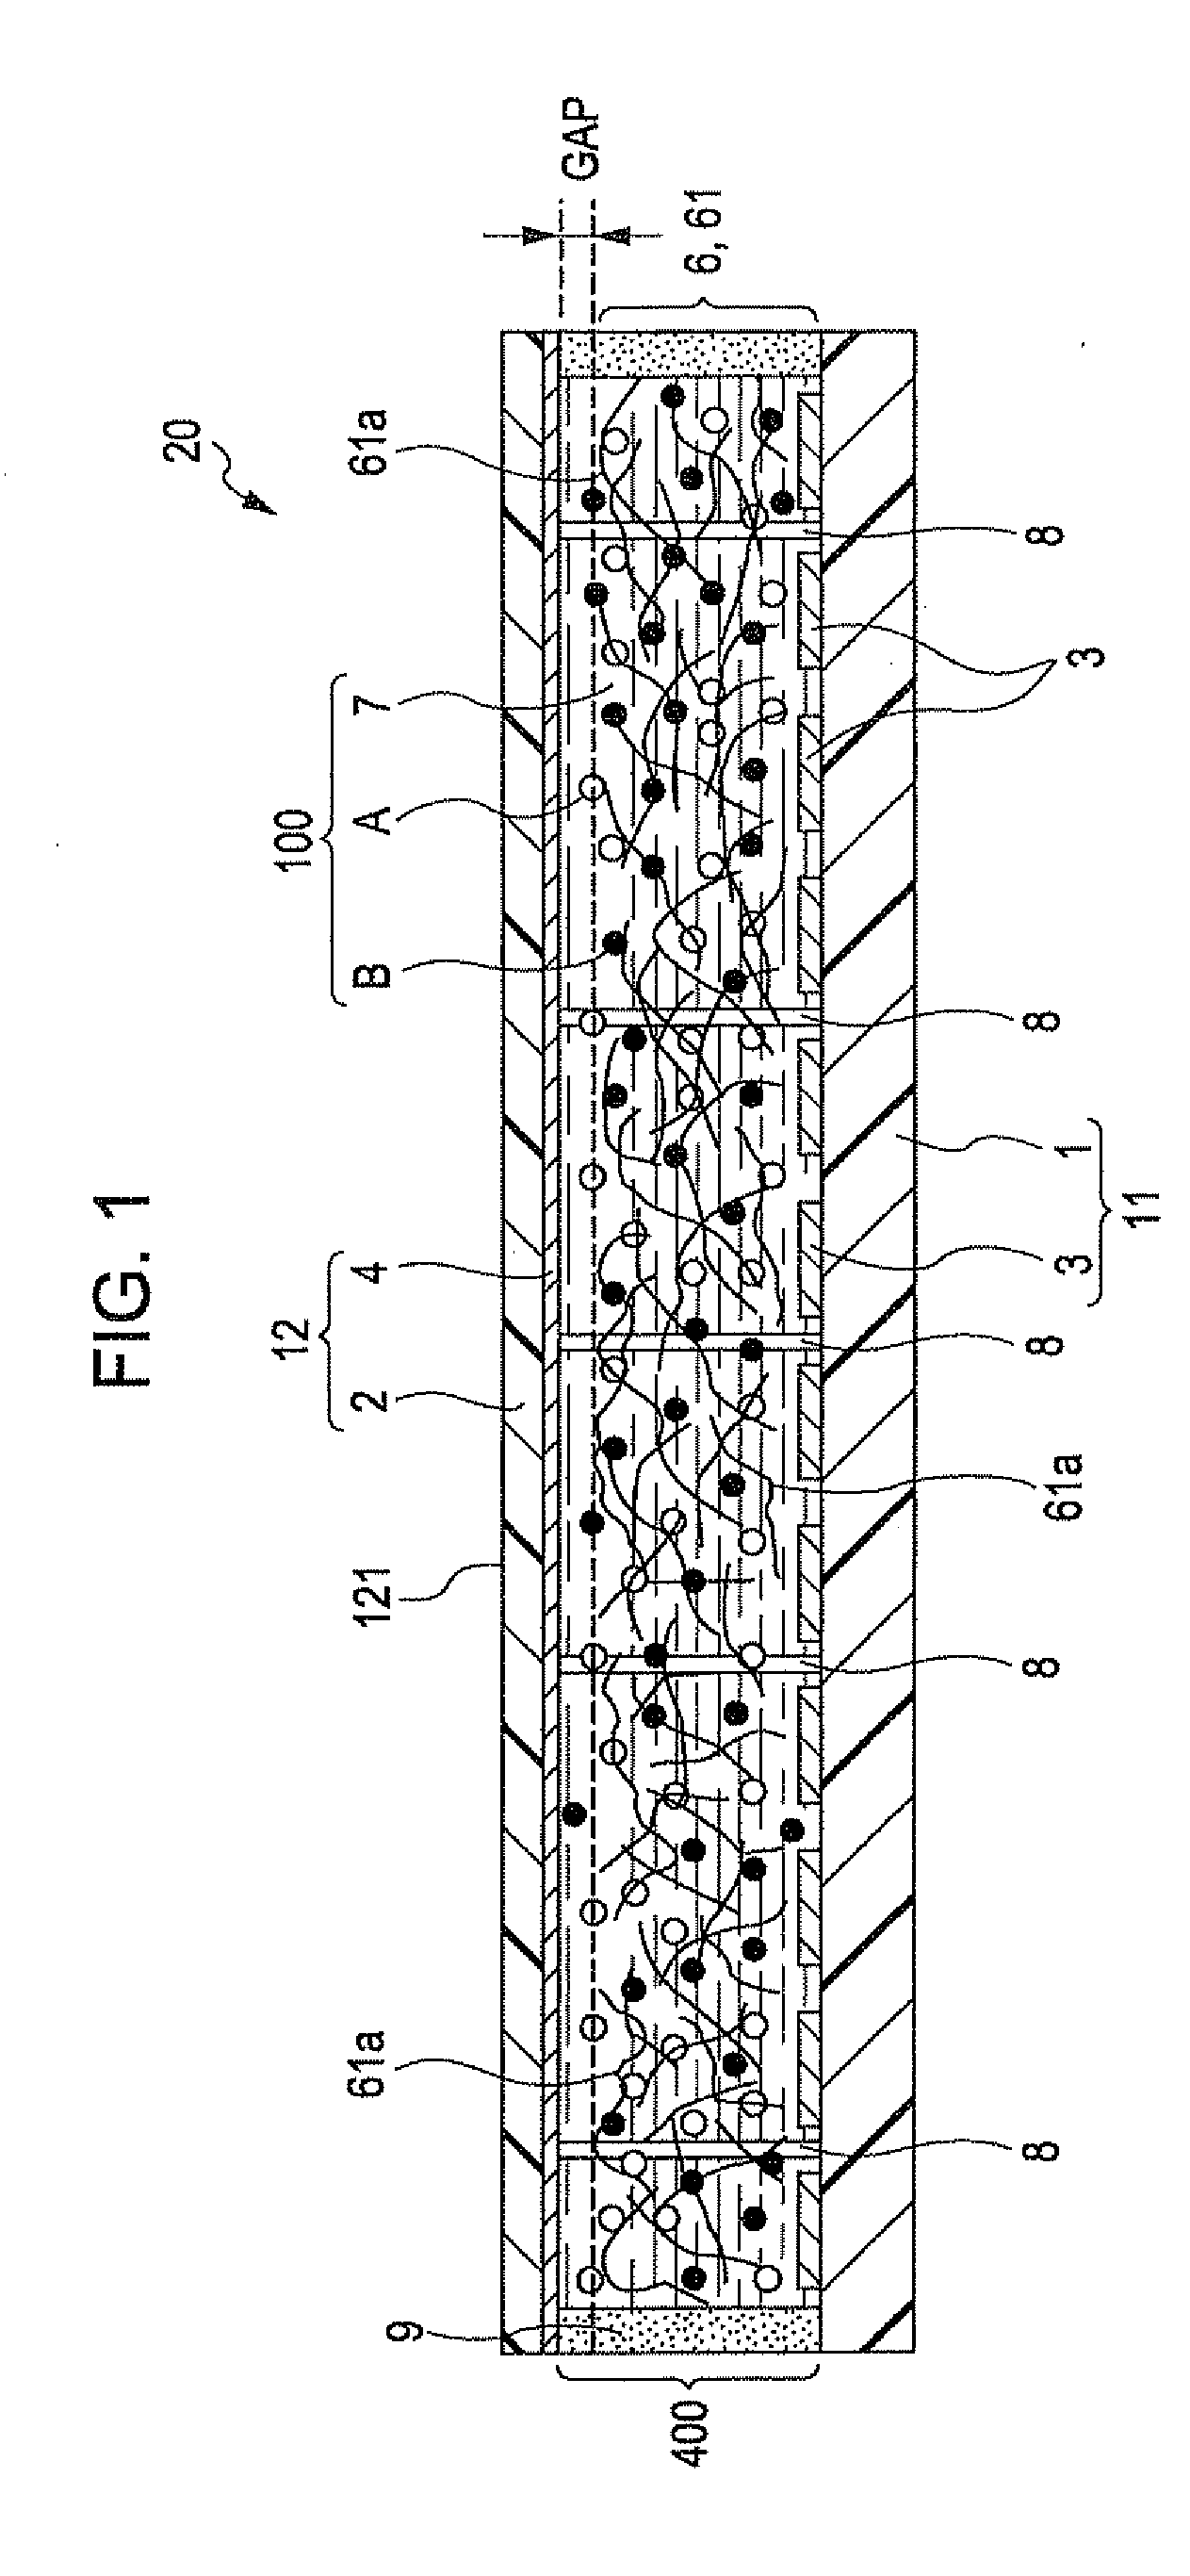 Display sheet, display device, and electronic apparatus